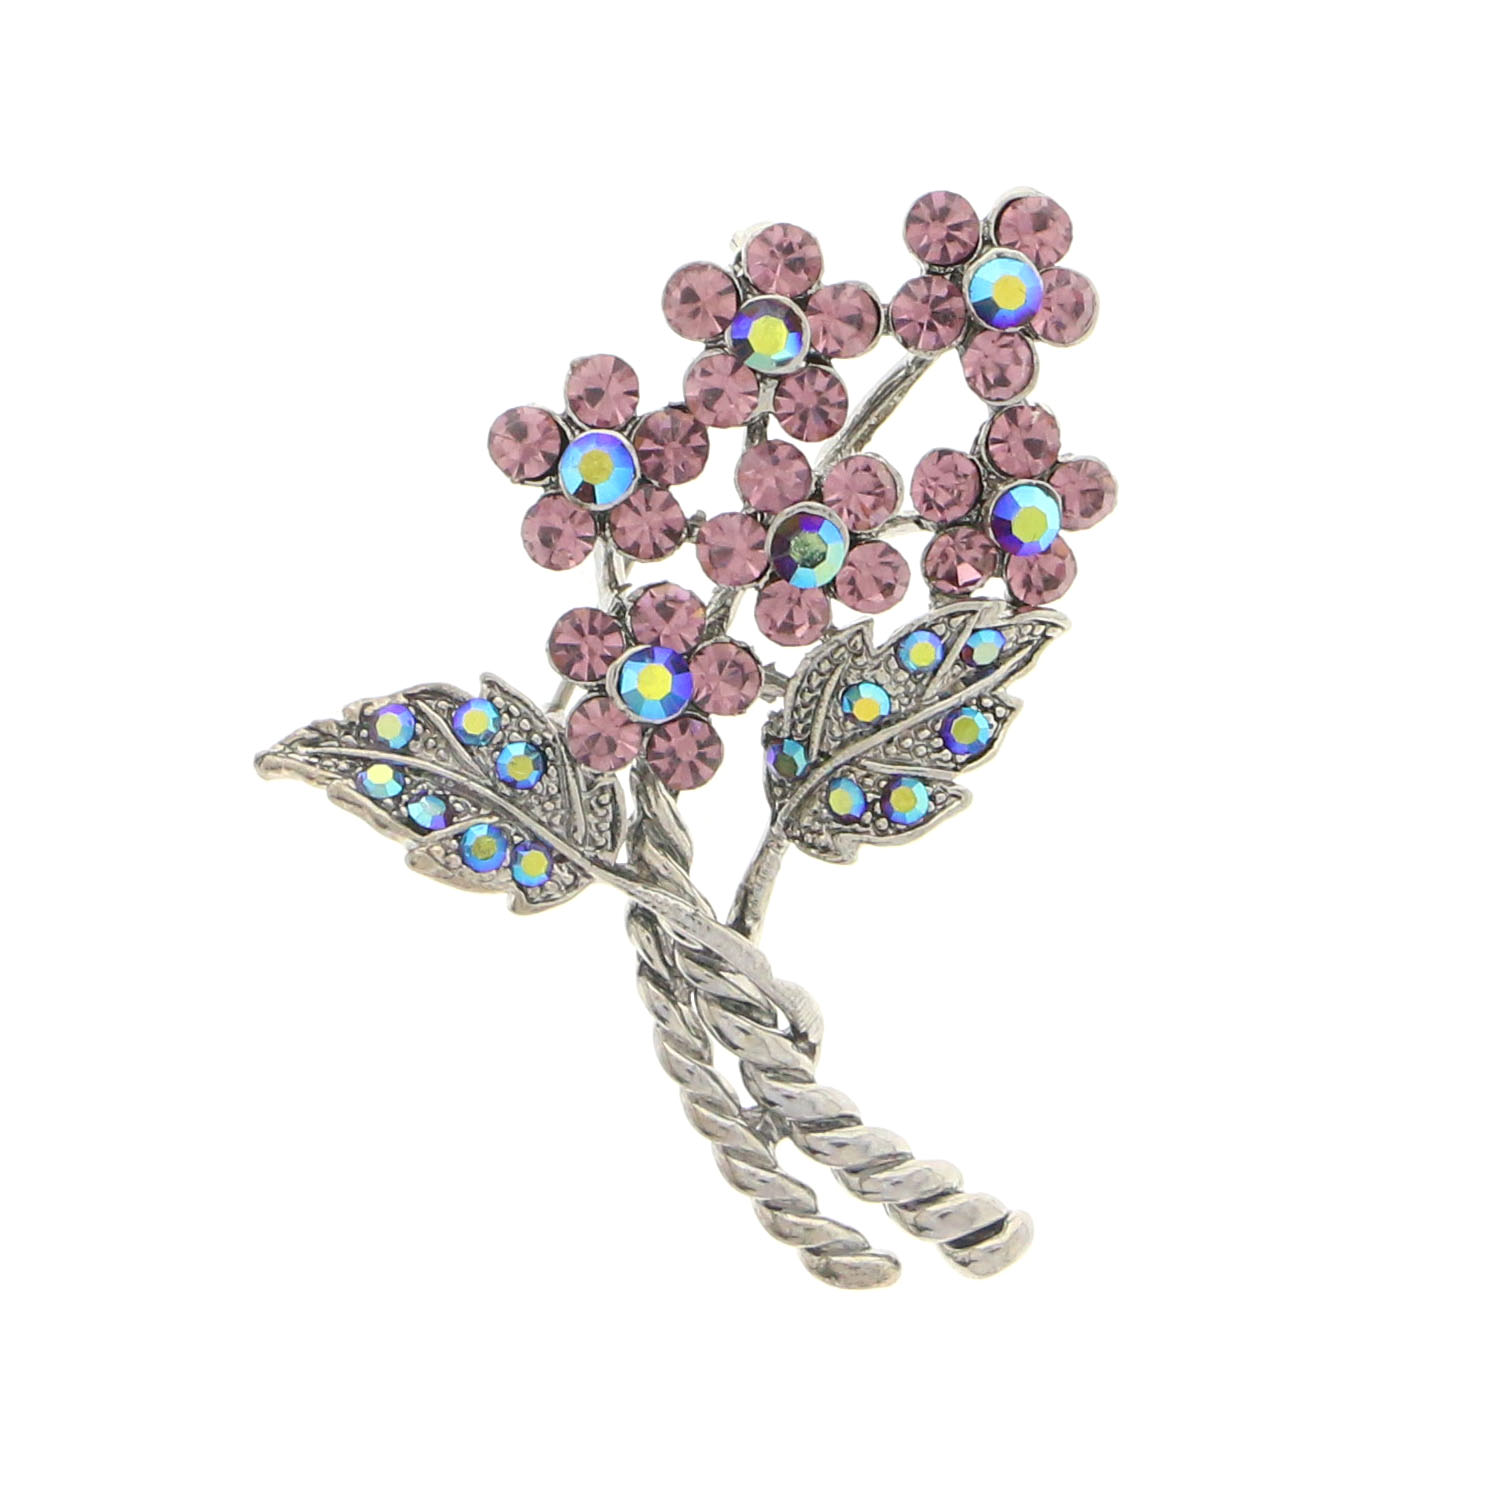 MI AMORE Flowers Brooch-Pin With Crystal Accents Silver-Tone & Multi Colored #LQP1163